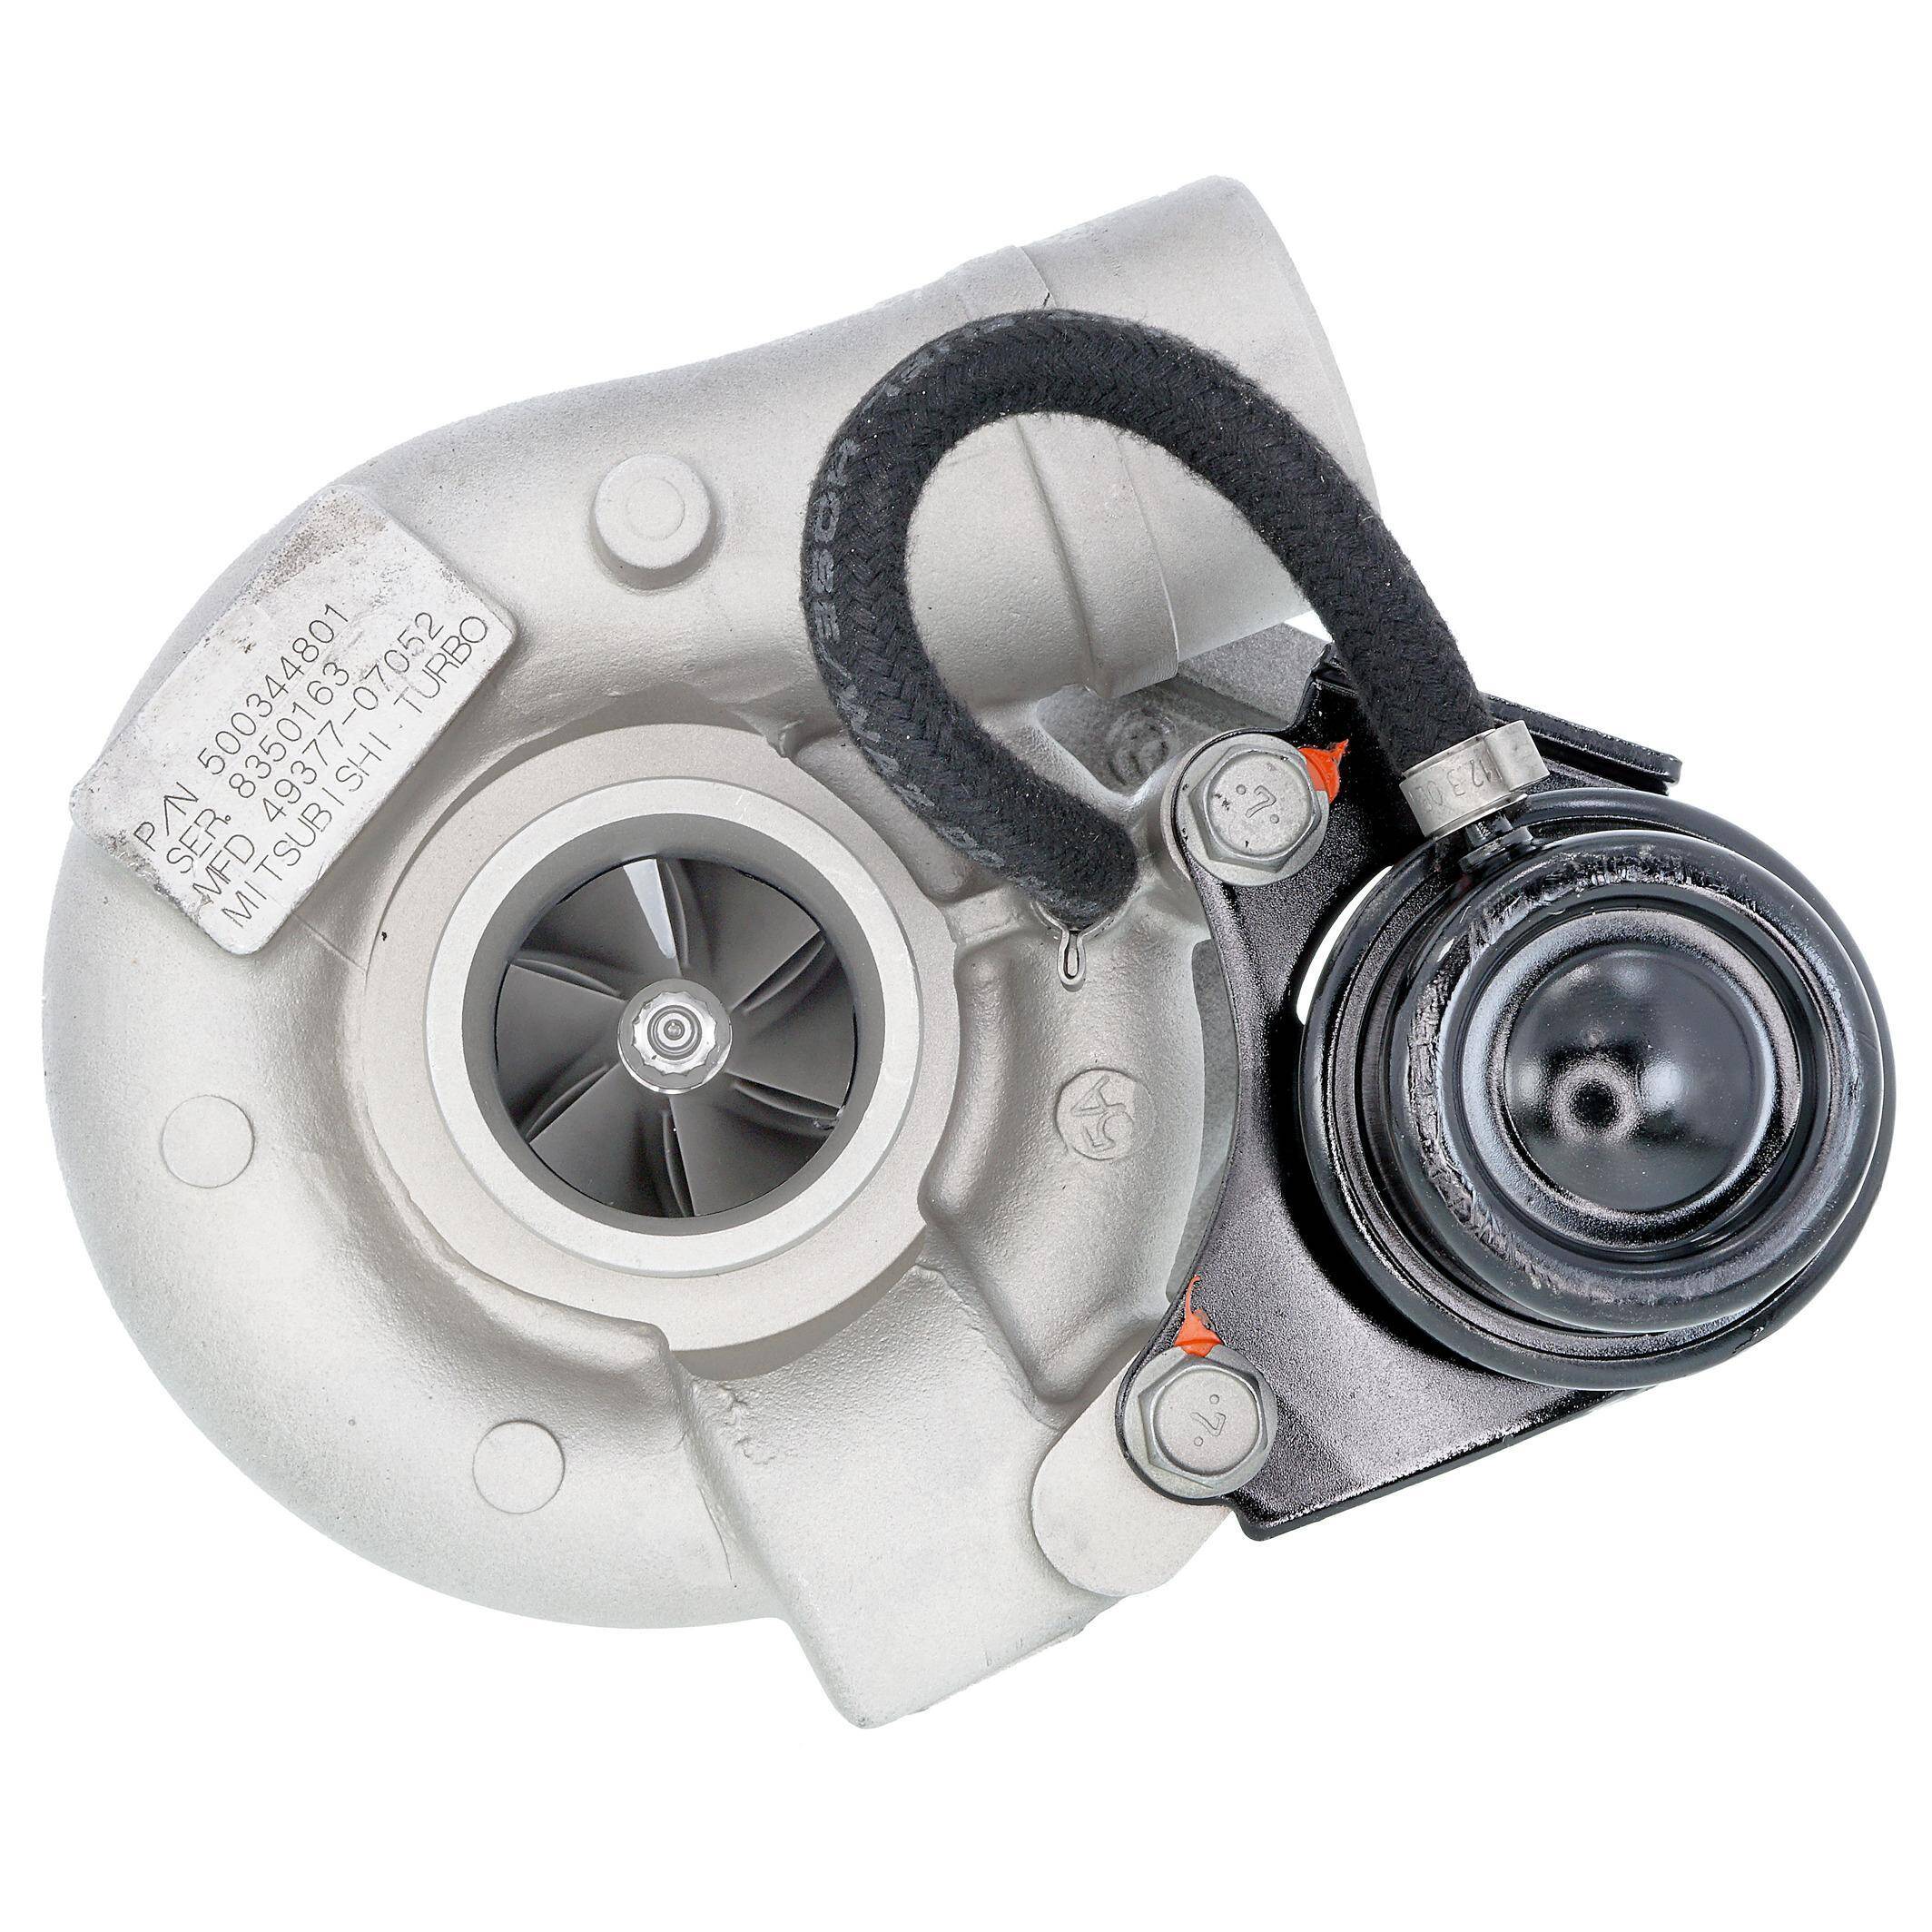 TURBOCHARGER TURBO REMANUFACTURED 49377-07052 5303-970-0054/81 49377-07052